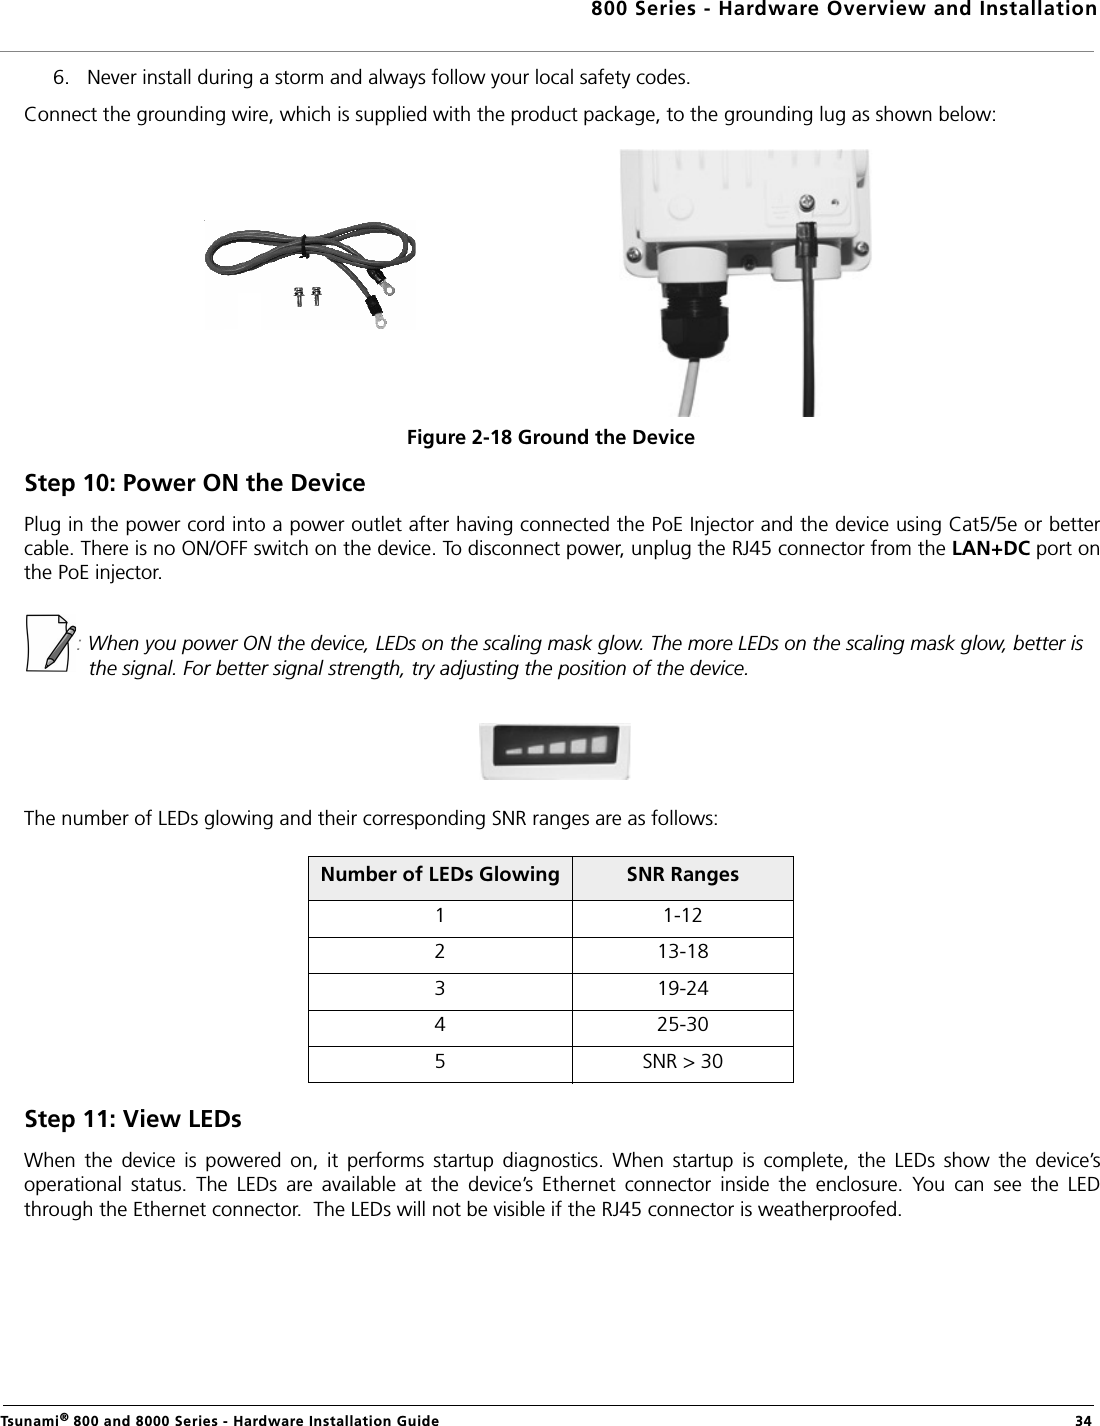 800 Series - Hardware Overview and InstallationTsunami® 800 and 8000 Series - Hardware Installation Guide  346. Never install during a storm and always follow your local safety codes.Connect the grounding wire, which is supplied with the product package, to the grounding lug as shown below:Figure 2-18 Ground the DeviceStep 10: Power ON the DevicePlug in the power cord into a power outlet after having connected the PoE Injector and the device using Cat5/5e or bettercable. There is no ON/OFF switch on the device. To disconnect power, unplug the RJ45 connector from the LAN+DC port onthe PoE injector.: When you power ON the device, LEDs on the scaling mask glow. The more LEDs on the scaling mask glow, better is the signal. For better signal strength, try adjusting the position of the device.The number of LEDs glowing and their corresponding SNR ranges are as follows:Step 11: View LEDsWhen  the  device  is  powered  on,  it  performs  startup  diagnostics.  When  startup  is  complete,  the  LEDs  show  the  device’soperational  status.  The  LEDs  are  available  at  the  device’s  Ethernet  connector  inside  the  enclosure.  You  can  see  the  LEDthrough the Ethernet connector.  The LEDs will not be visible if the RJ45 connector is weatherproofed.Number of LEDs Glowing SNR Ranges1 1-122 13-183 19-244 25-305 SNR &gt; 30